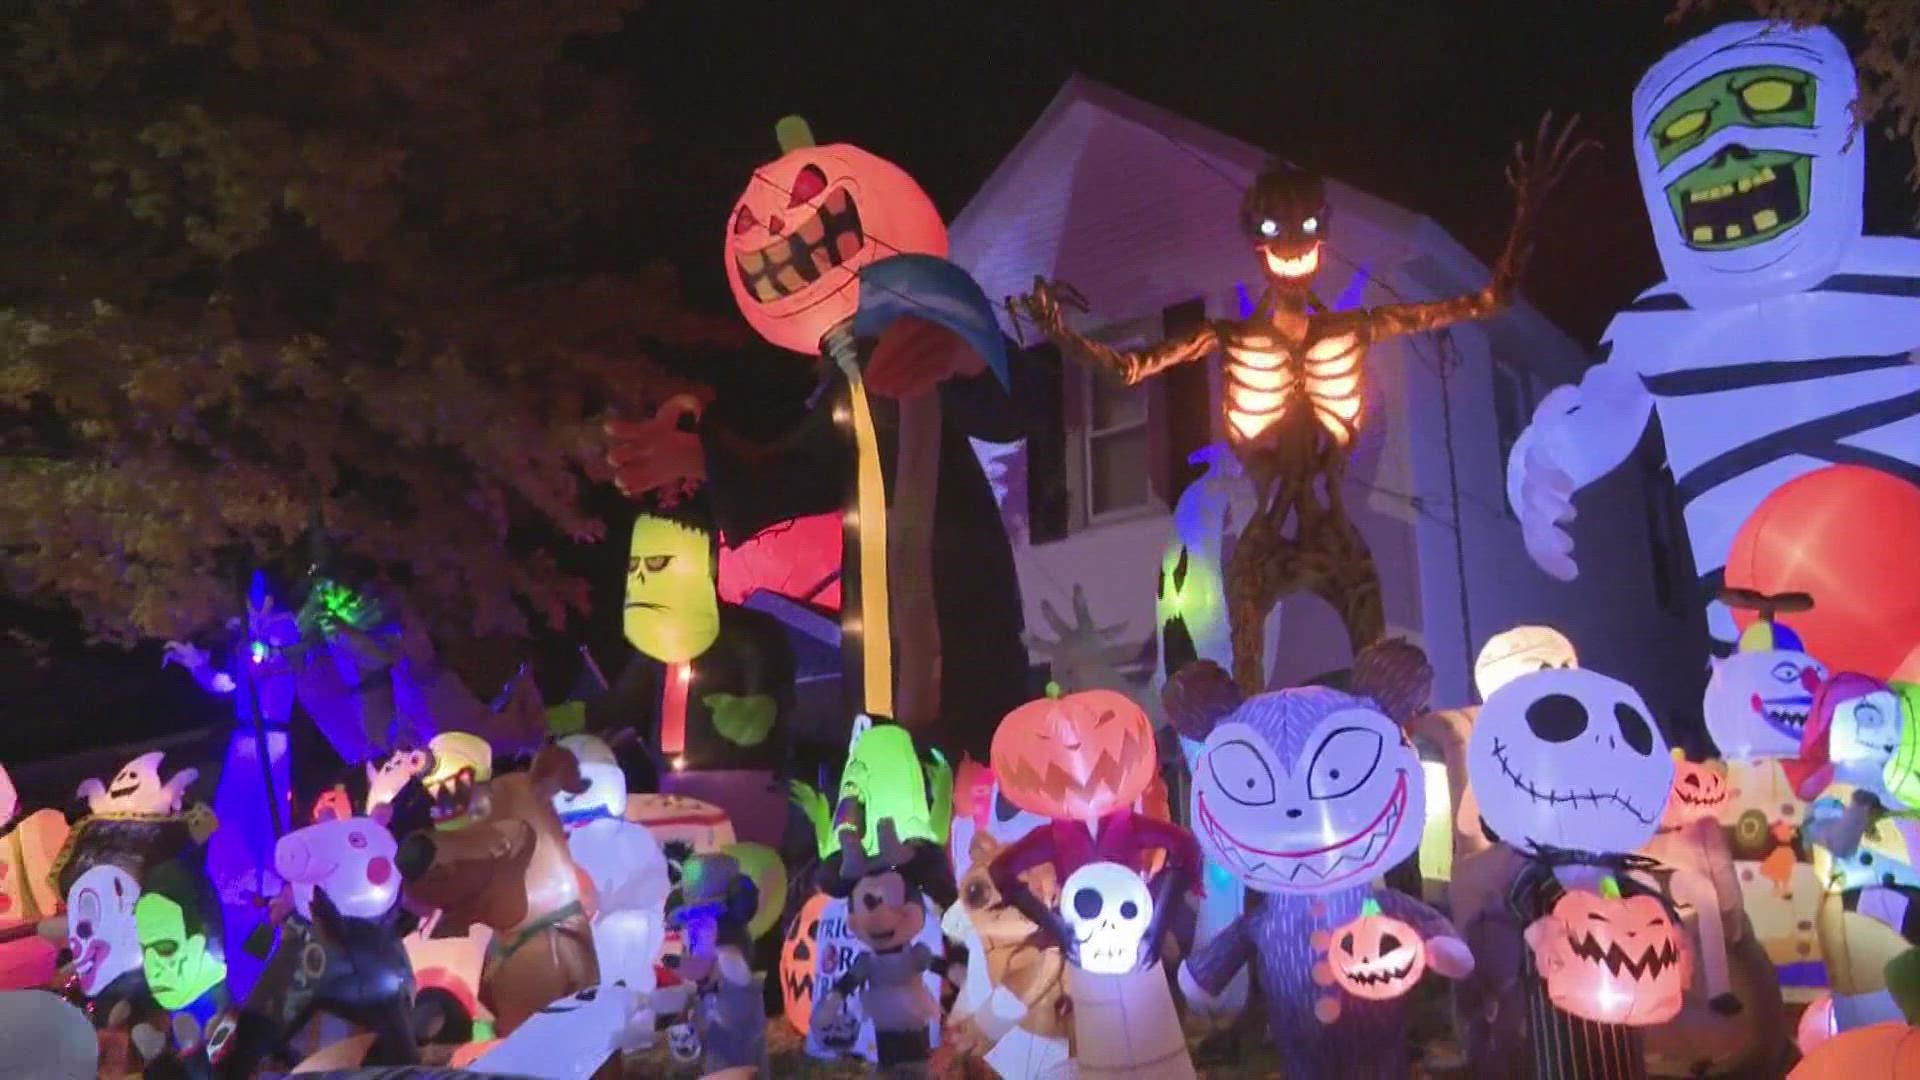 A wickedly cool Halloween display in the 100 block of East Bergey Street in Wadsworth features dozens of decorations -- including more than 50 inflatables.